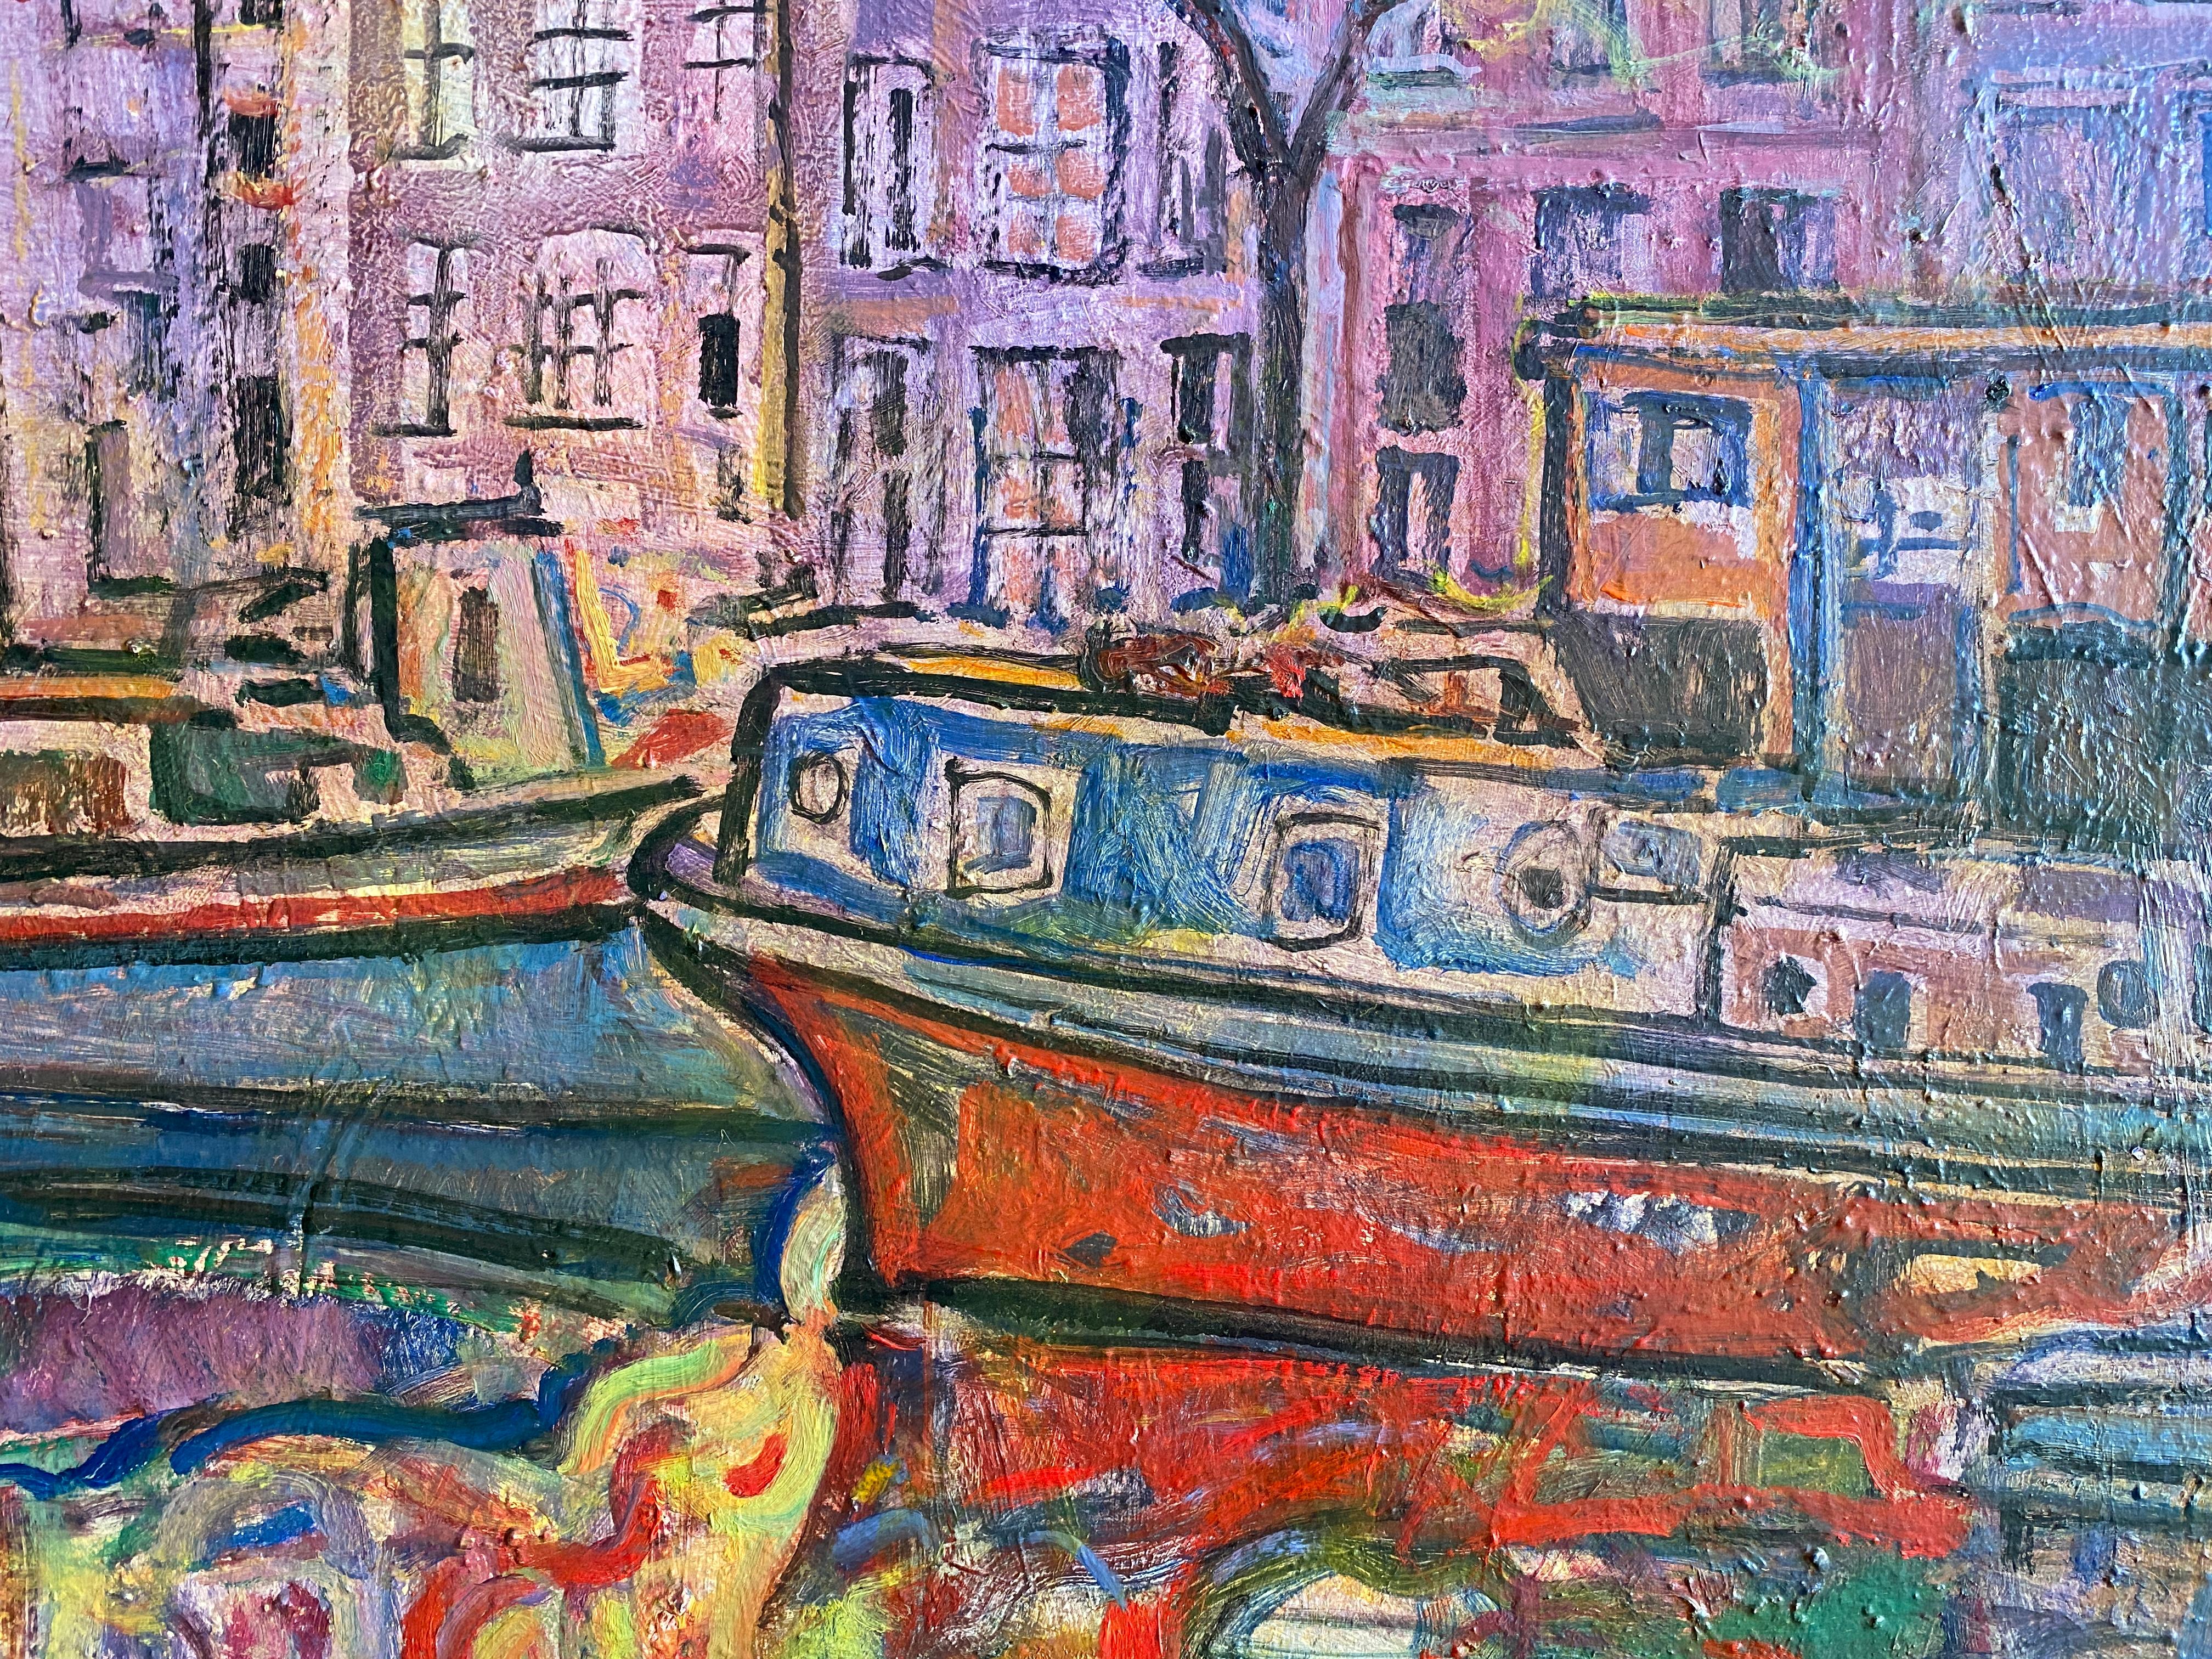 Otoño en Amsterdam (Autumn in Amsterdam  
Oil on canvas by Spanish artist Joan Raset.
Dimension 81 cm H x 65 cm W x 2 cm D

Interesting close up view of an Amsterdam canal in autumn. The author uses a surprising palette of colors that fills this